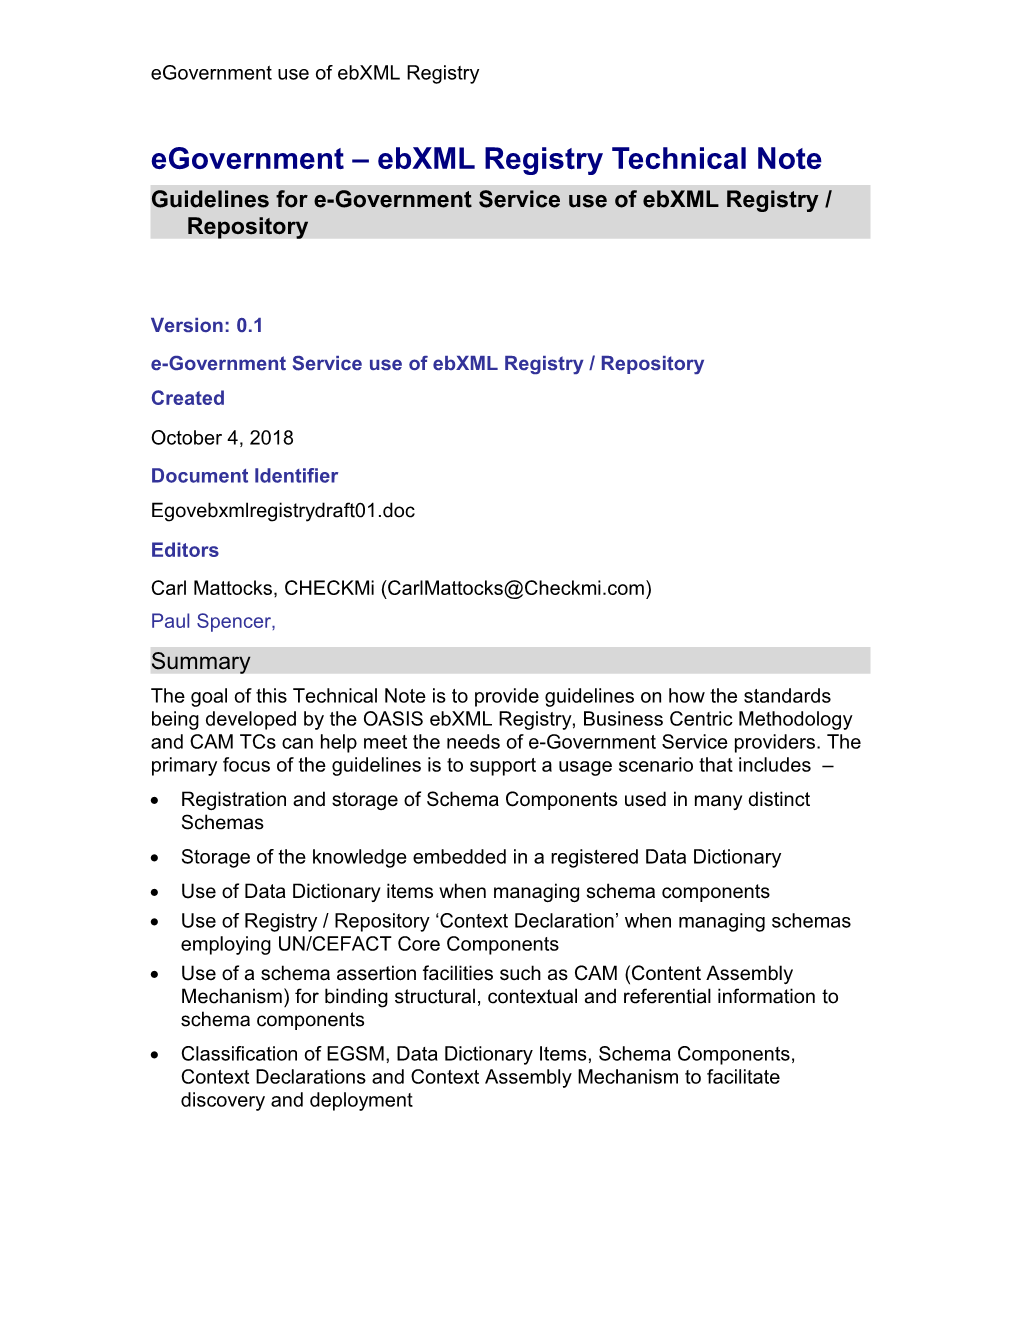 Guidelines for E-Government Service Use of Ebxml Registry / Repository